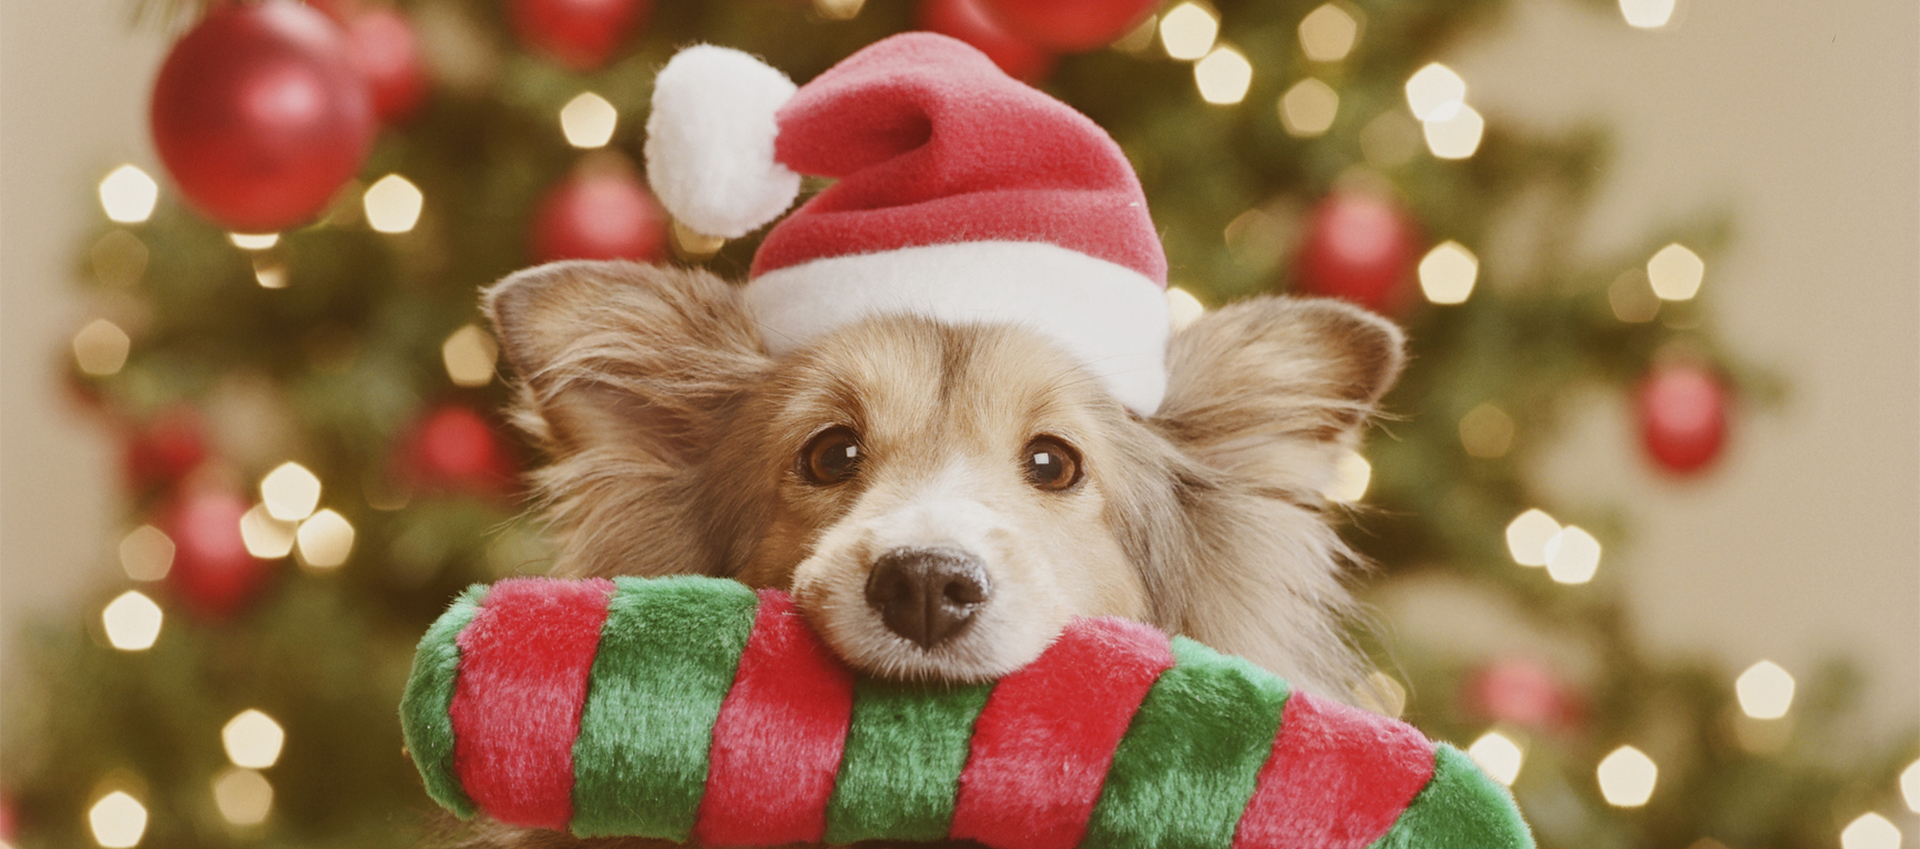 Image of a dog holding a dog toy in front of a Christmas tree